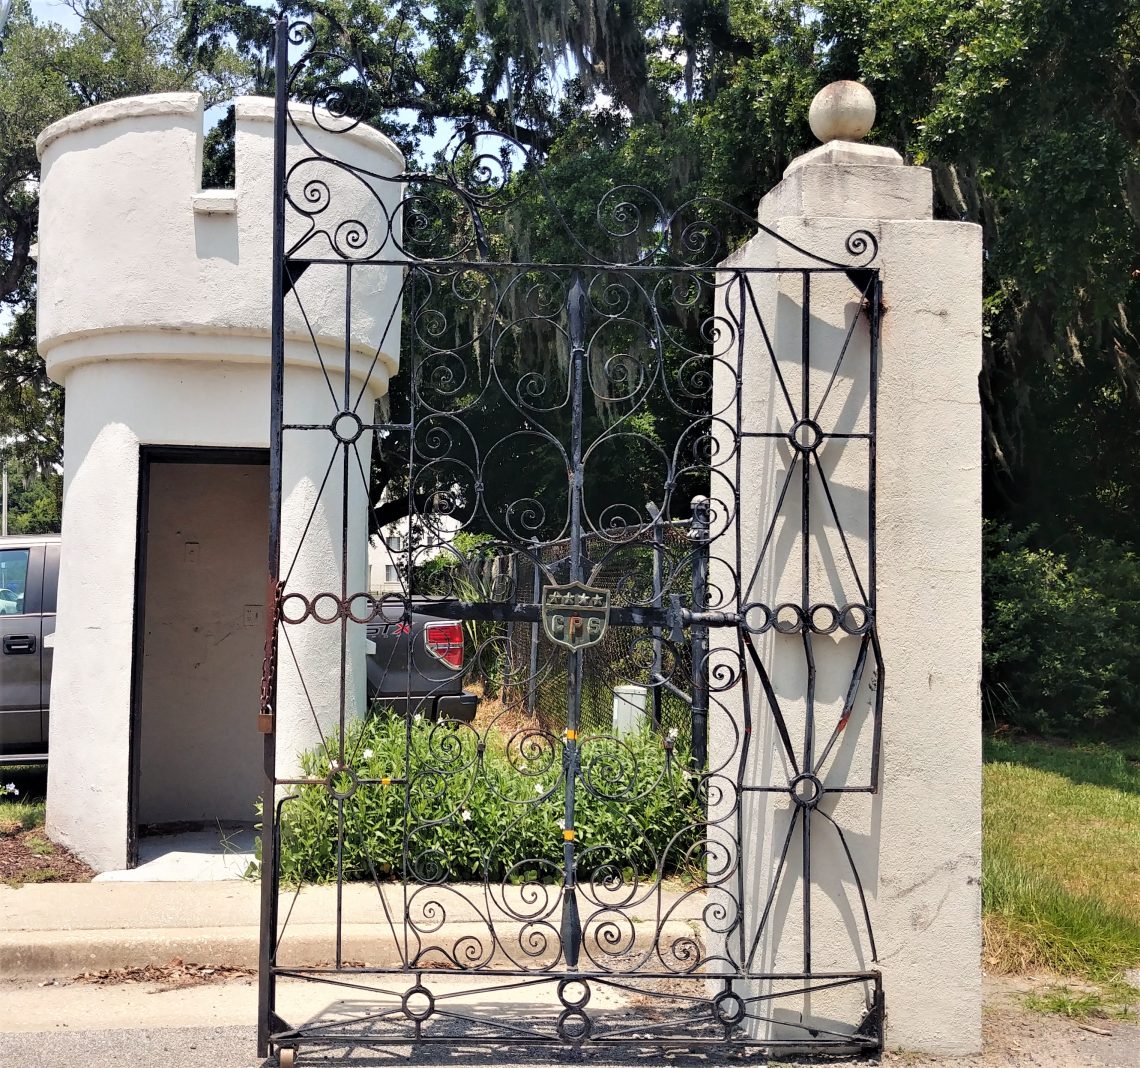 This gate, inspired by the famous Sword Gate by Christopher Werner, was actually made for General Charles Pelot Summerall's plantation in Aiken, SC.  You can see his 4 stars and initials in the shield in the center of the gate. It now hangs at the Citadel, the Military College of South Carolina and is, aptly, called the Summerall Gate. It now guards the entrance from the Citadel to Hampton Park.